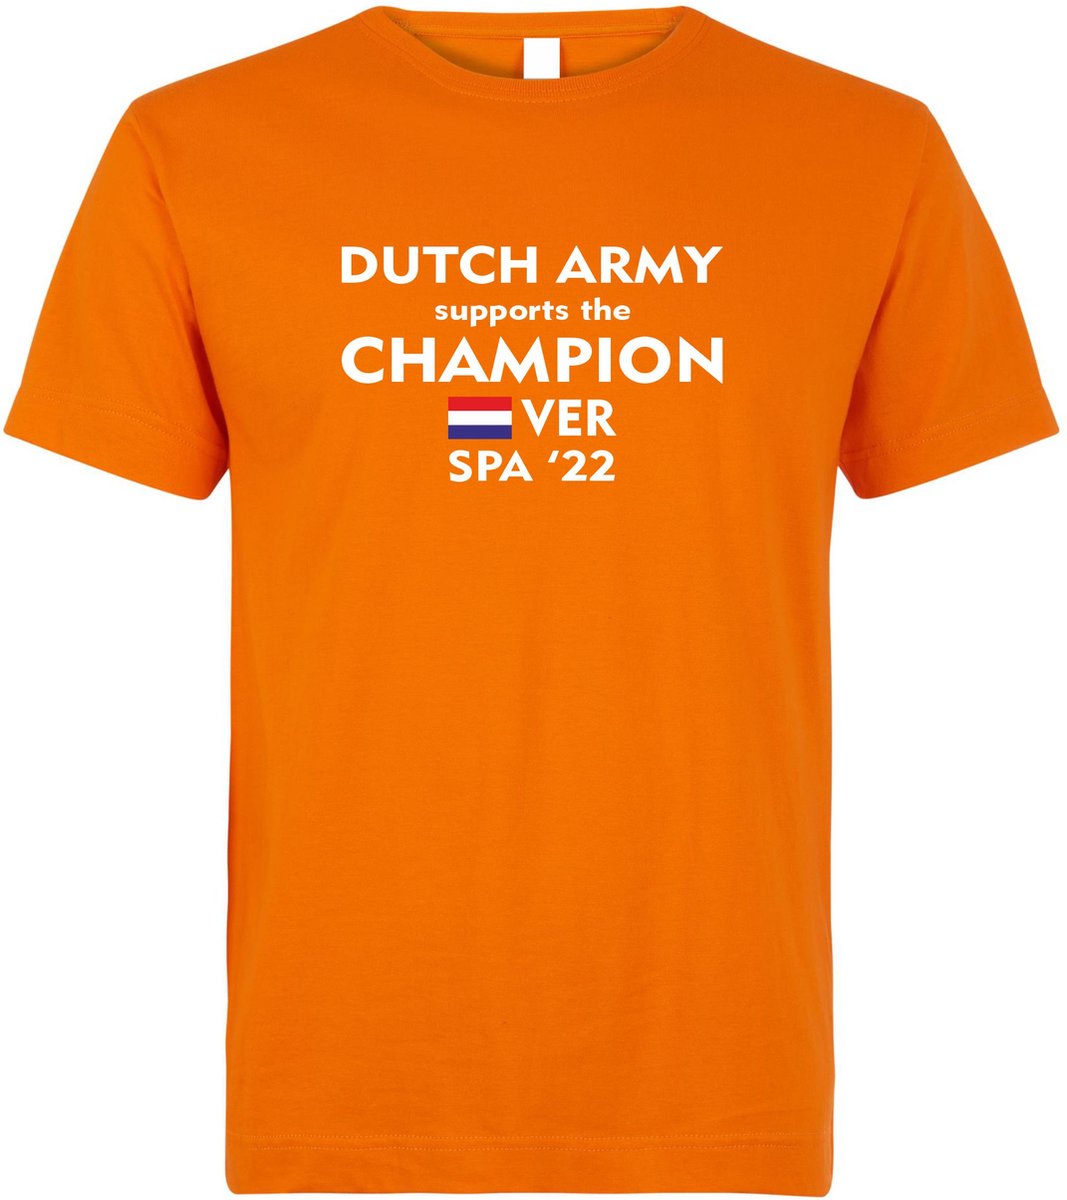 T-shirt Dutch Army supports the Champion Spa 22 | Max Verstappen / Red Bull Racing / Formule 1 fan | Grand Prix Circuit Spa-Francorchamps | kleding shirt | Oranje | maat S